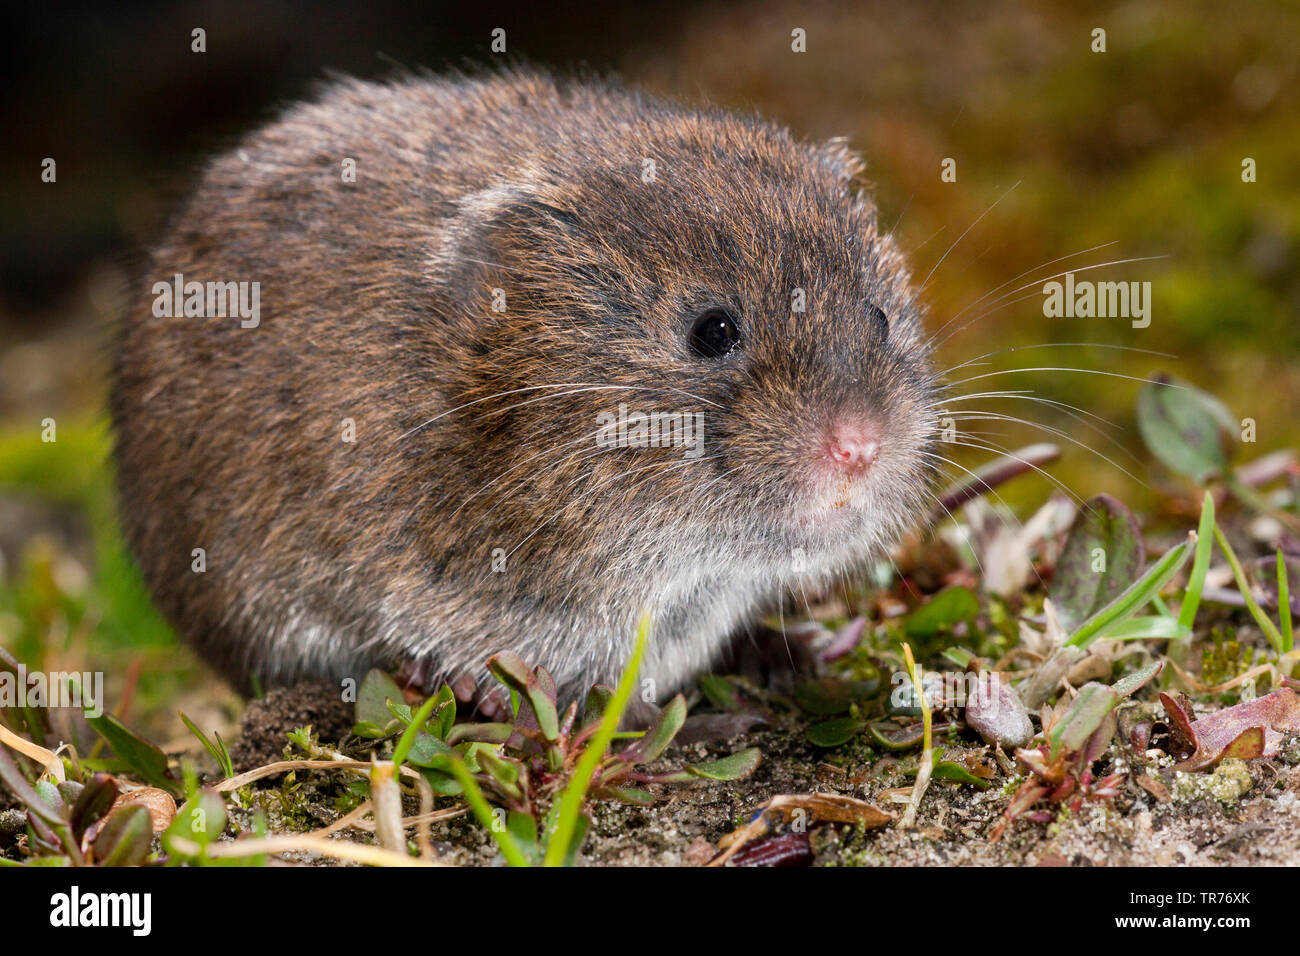 https://c8.alamy.com/comp/TR76XK/field-vole-short-tailed-vole-microtus-agrestis-eating-on-the-forest-floor-netherlands-TR76XK.jpg